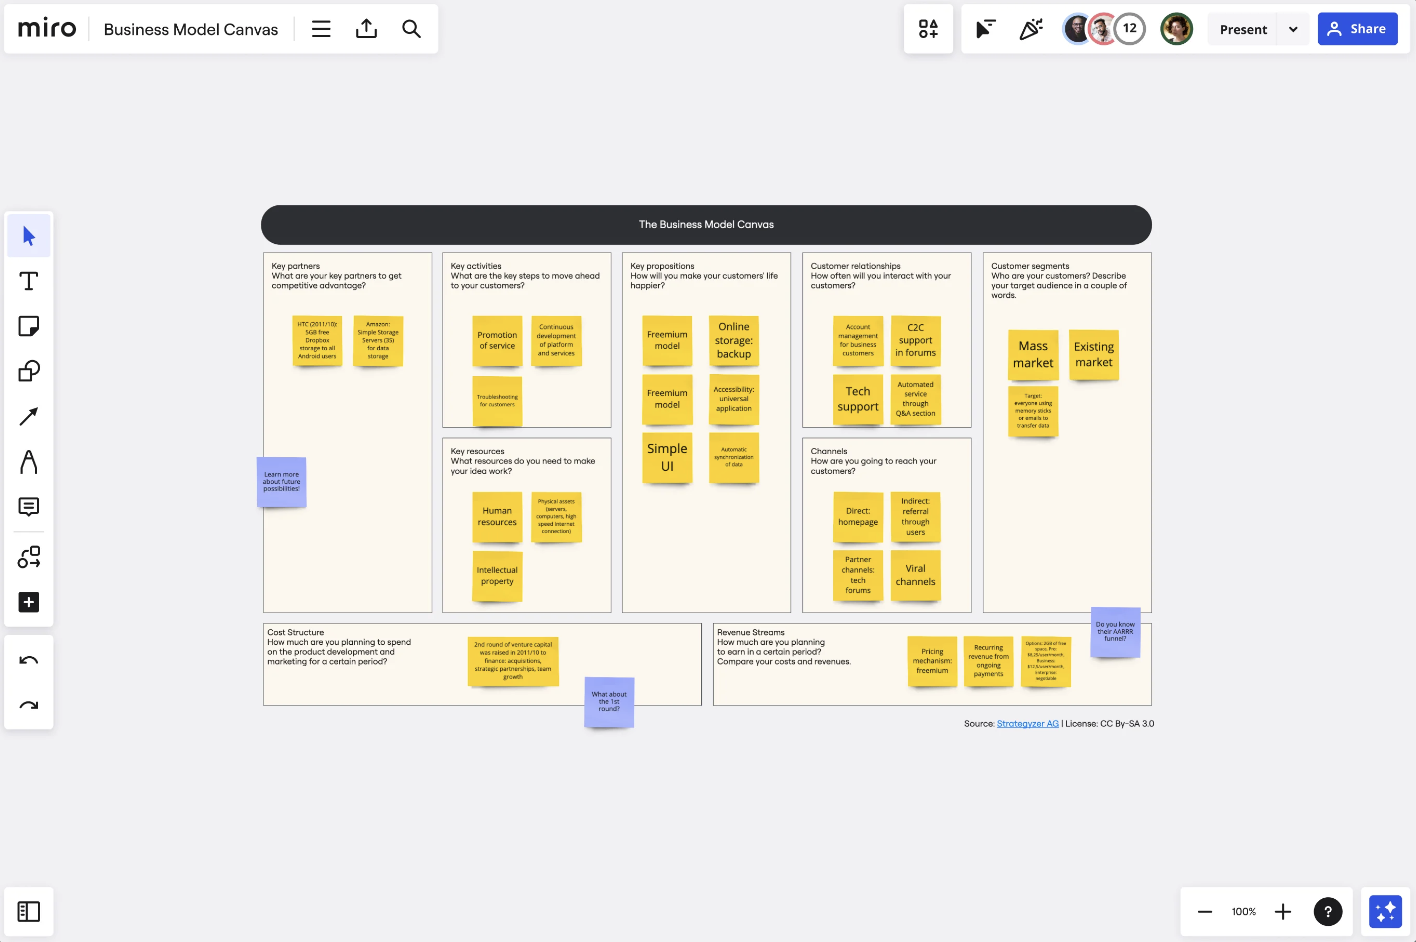 Miro's business model canvas template